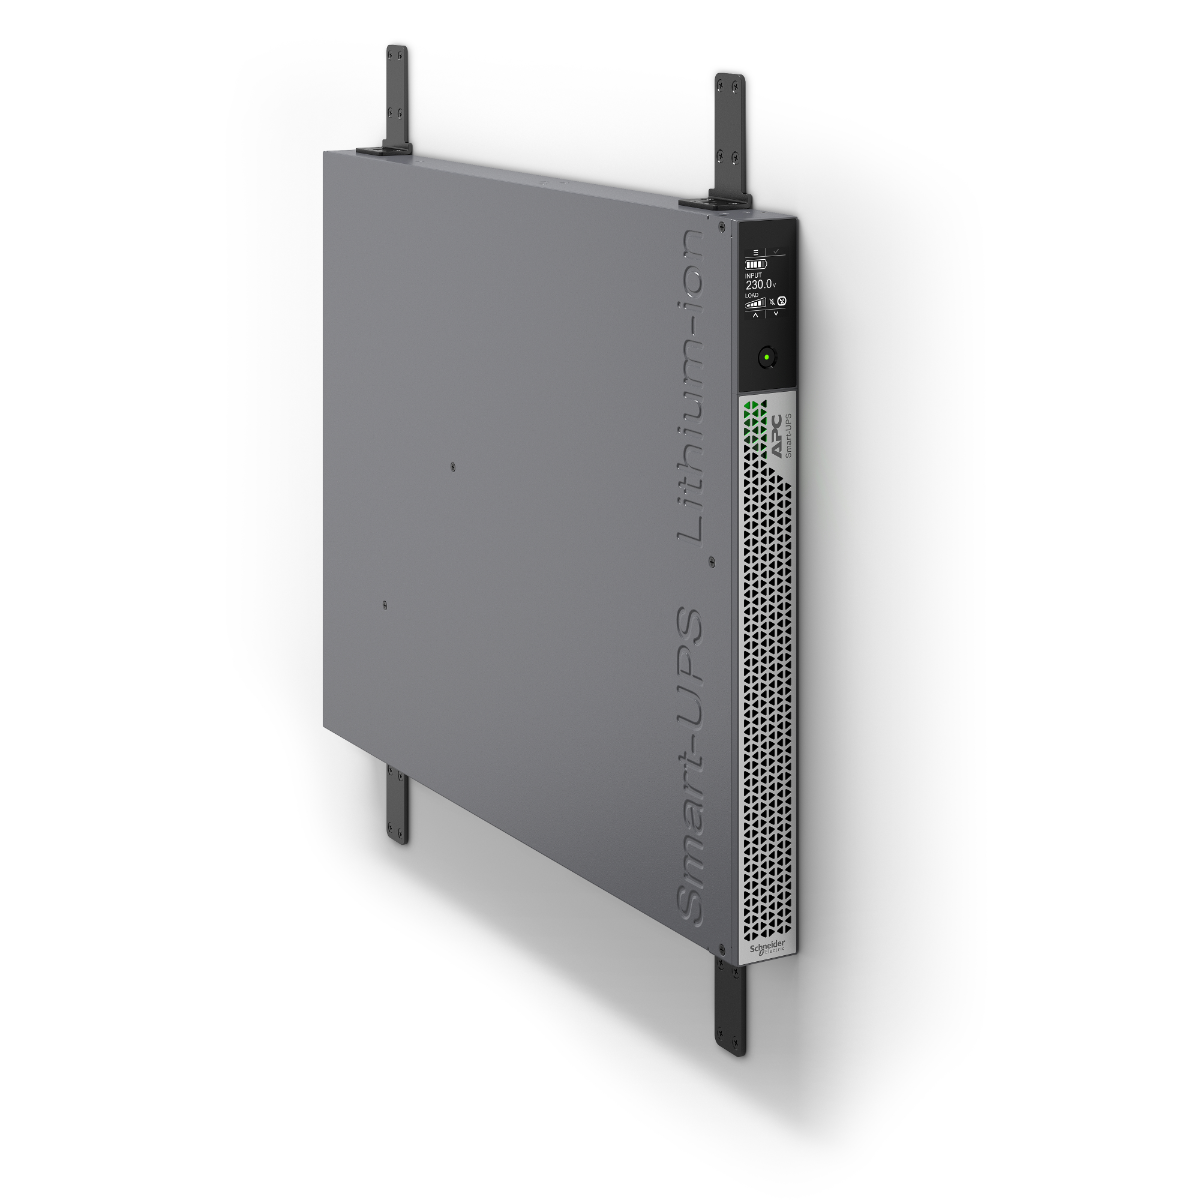 APC Smart-UPS Ultra, 3000VA 240V 1U, with Lithium-Ion Battery, with Network Management Card Embedded